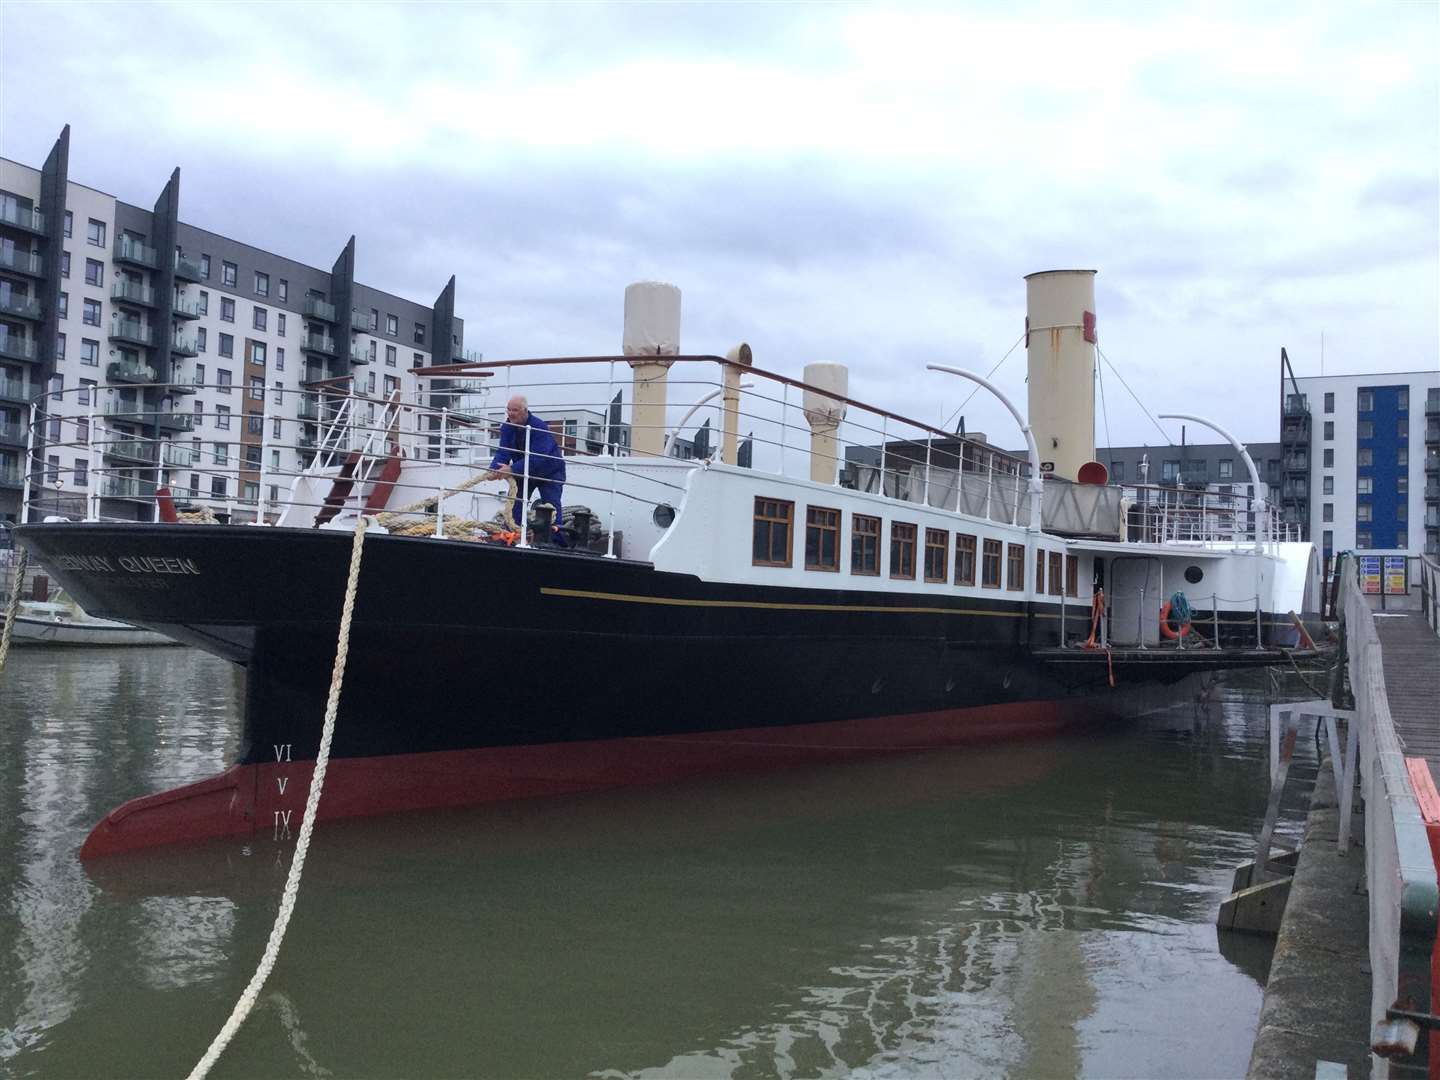 The Medway Queen is now back at Gillingham Pier Picture: Jason Arthur